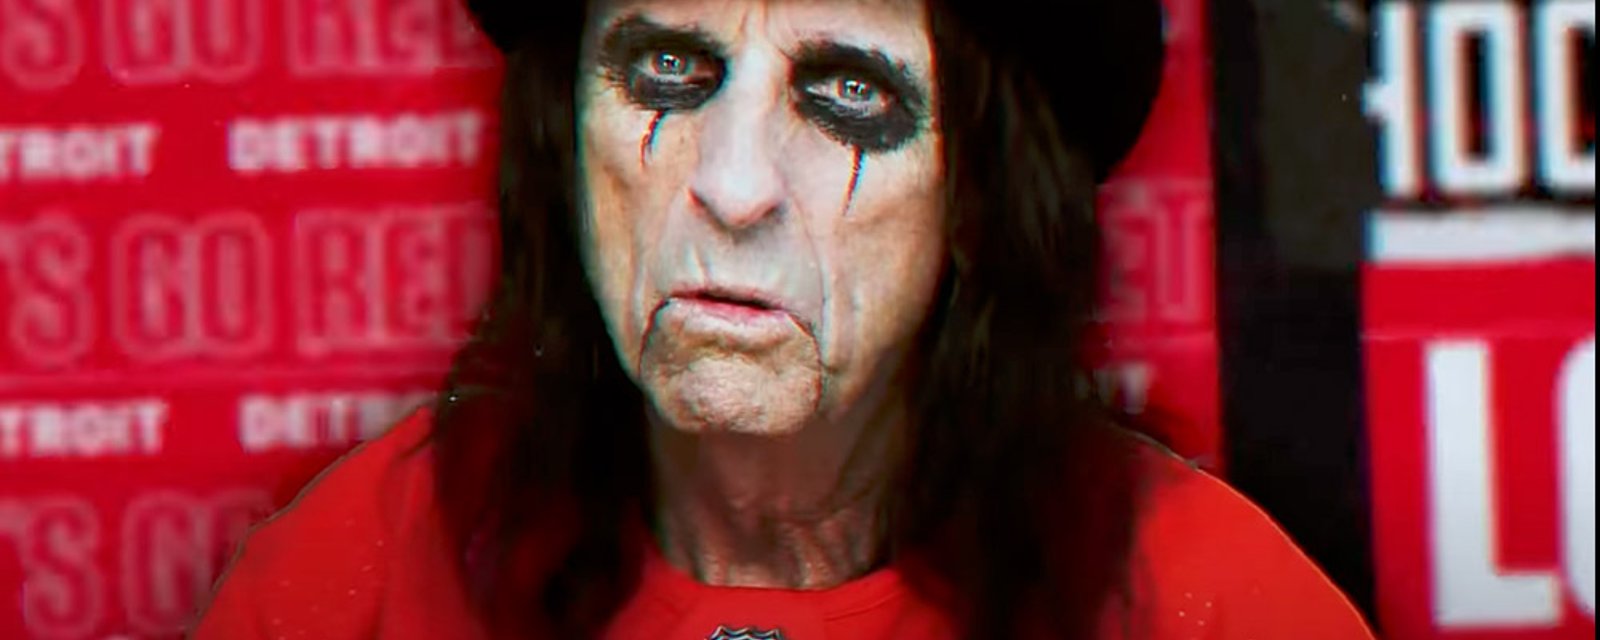 Check out Detroit native shock rocker Alice Cooper's Red Wings-inspired track (VIDEO)